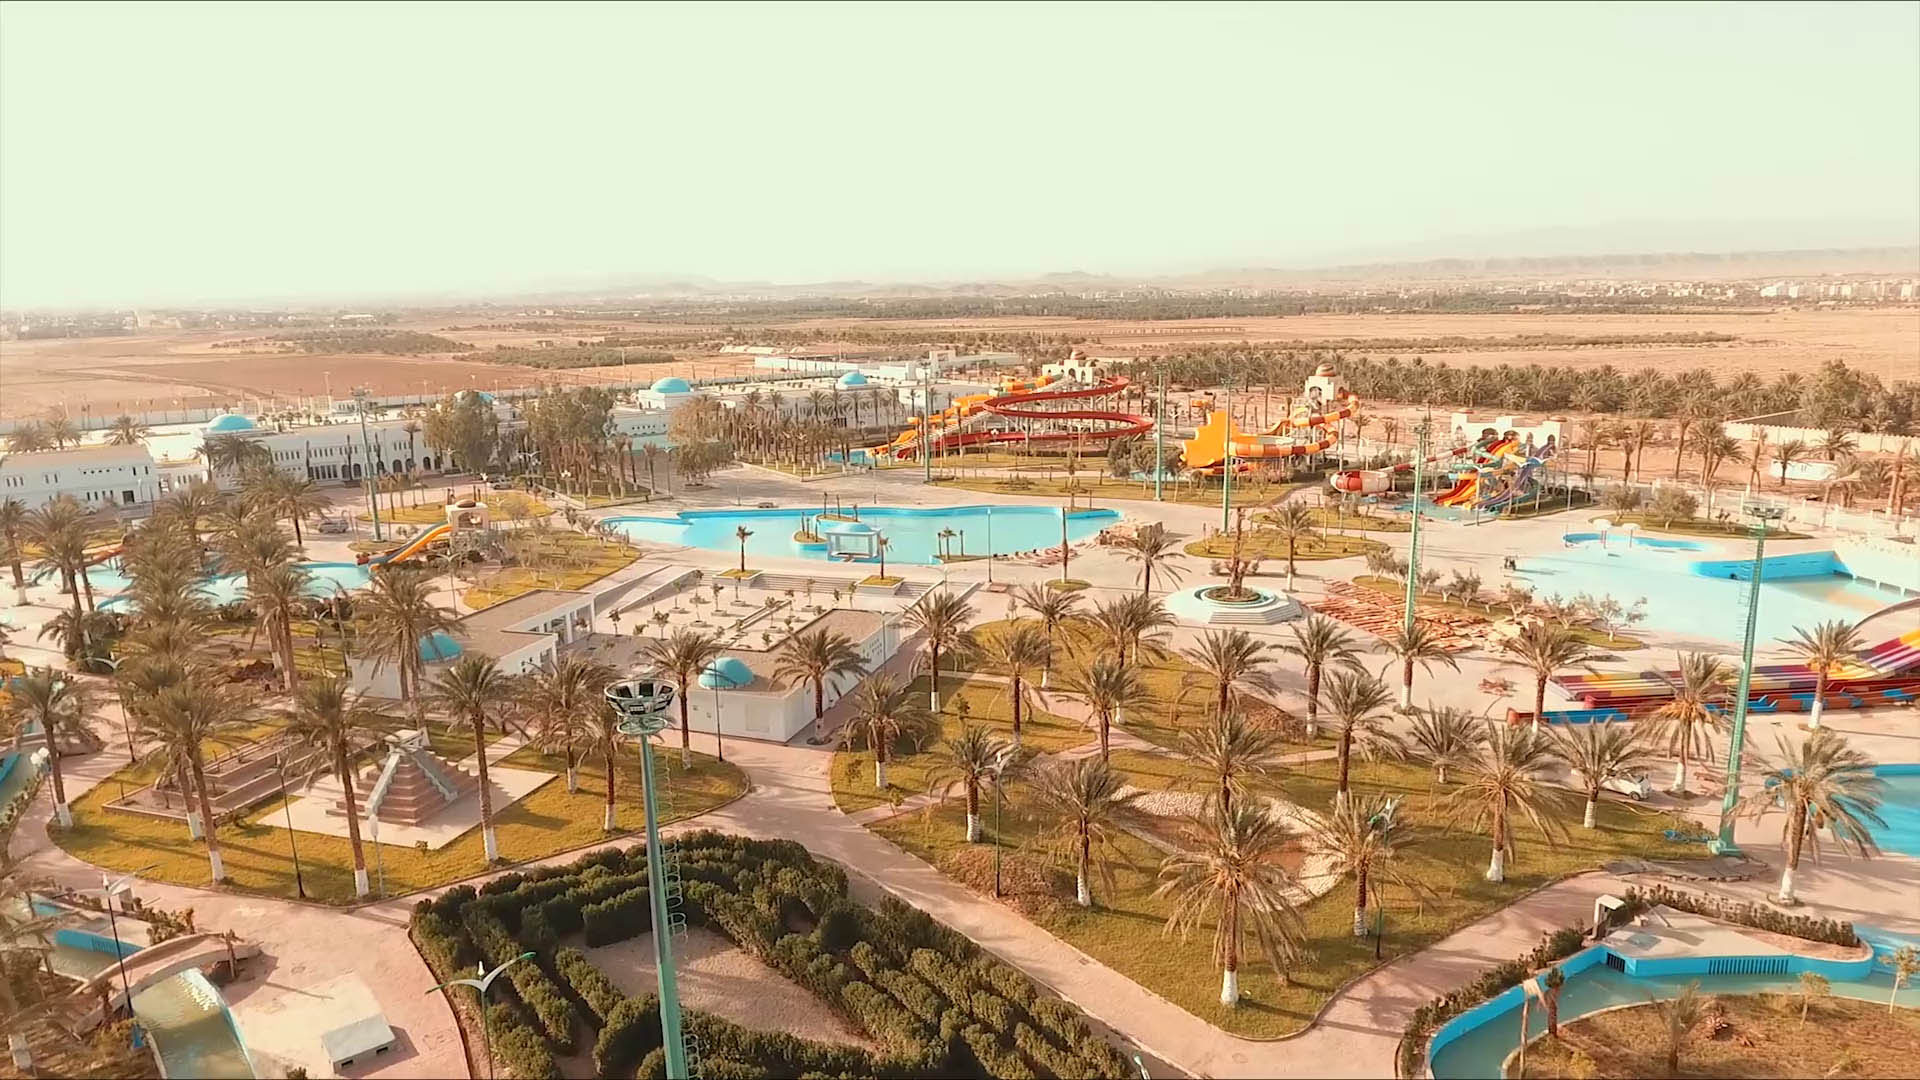 <p>The waterpark features multiple pools, water slides and an artificial river – the Ziban – fed by a saline-water purification and recycling system.</p>